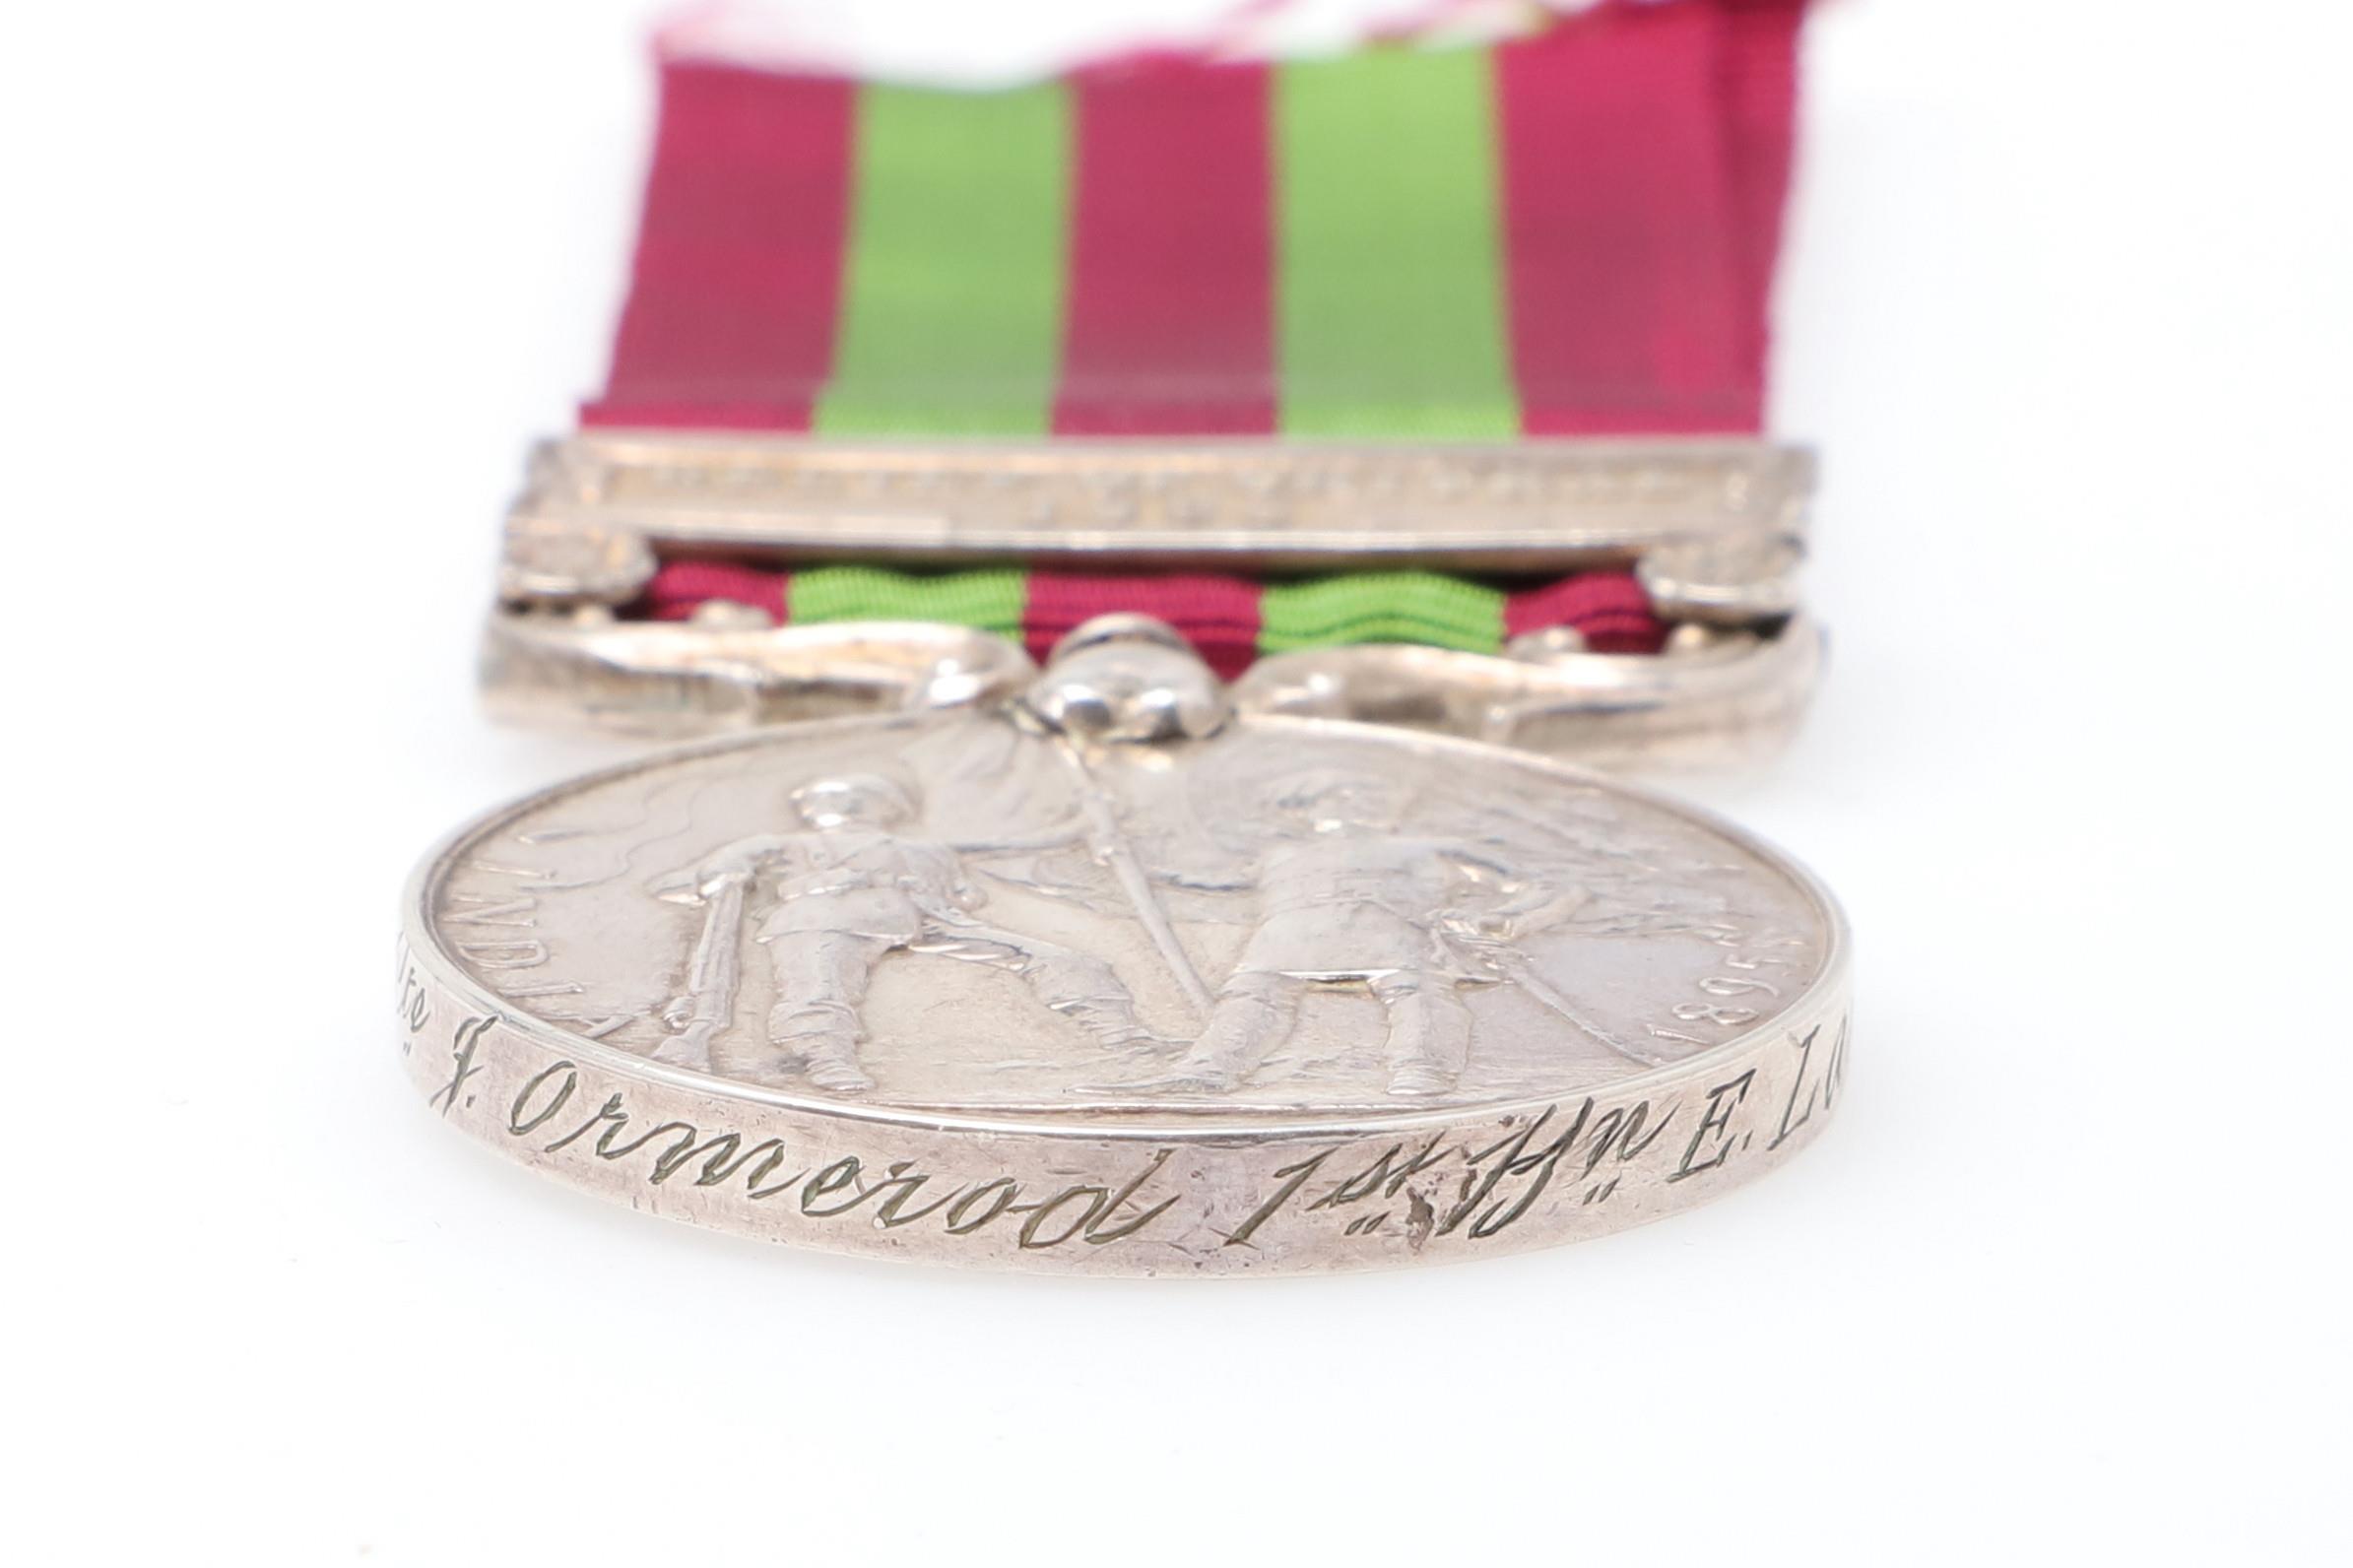 A VICTORIAN INDIA MEDAL 1896 TO THE EATS LANCS REGT. - Image 5 of 6